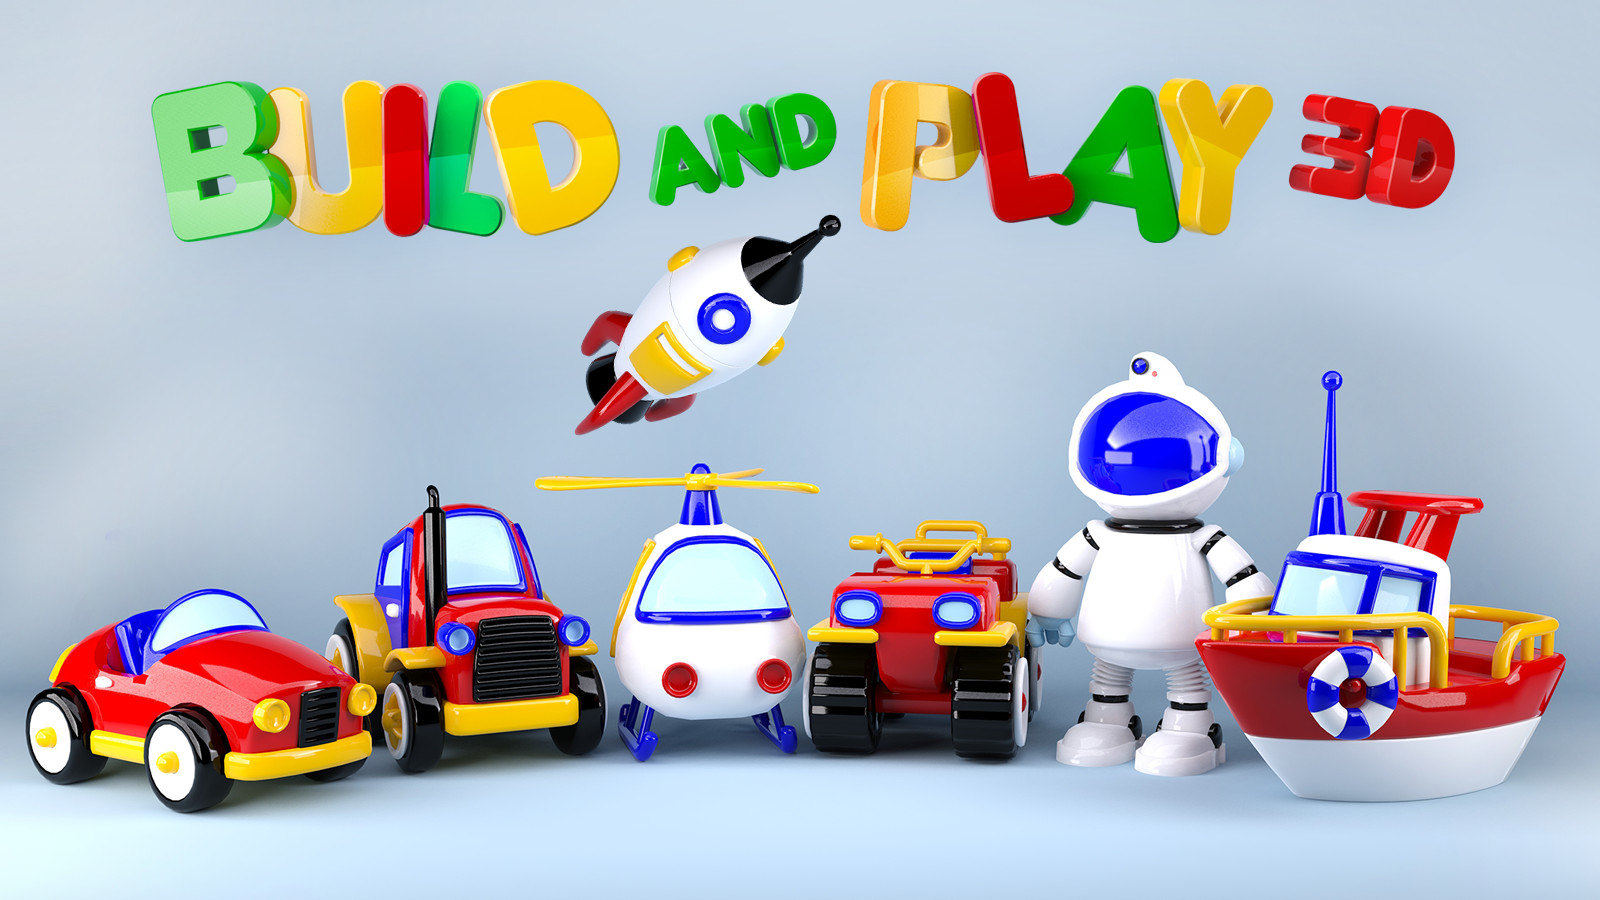 Play Video - Build and Play 3D 